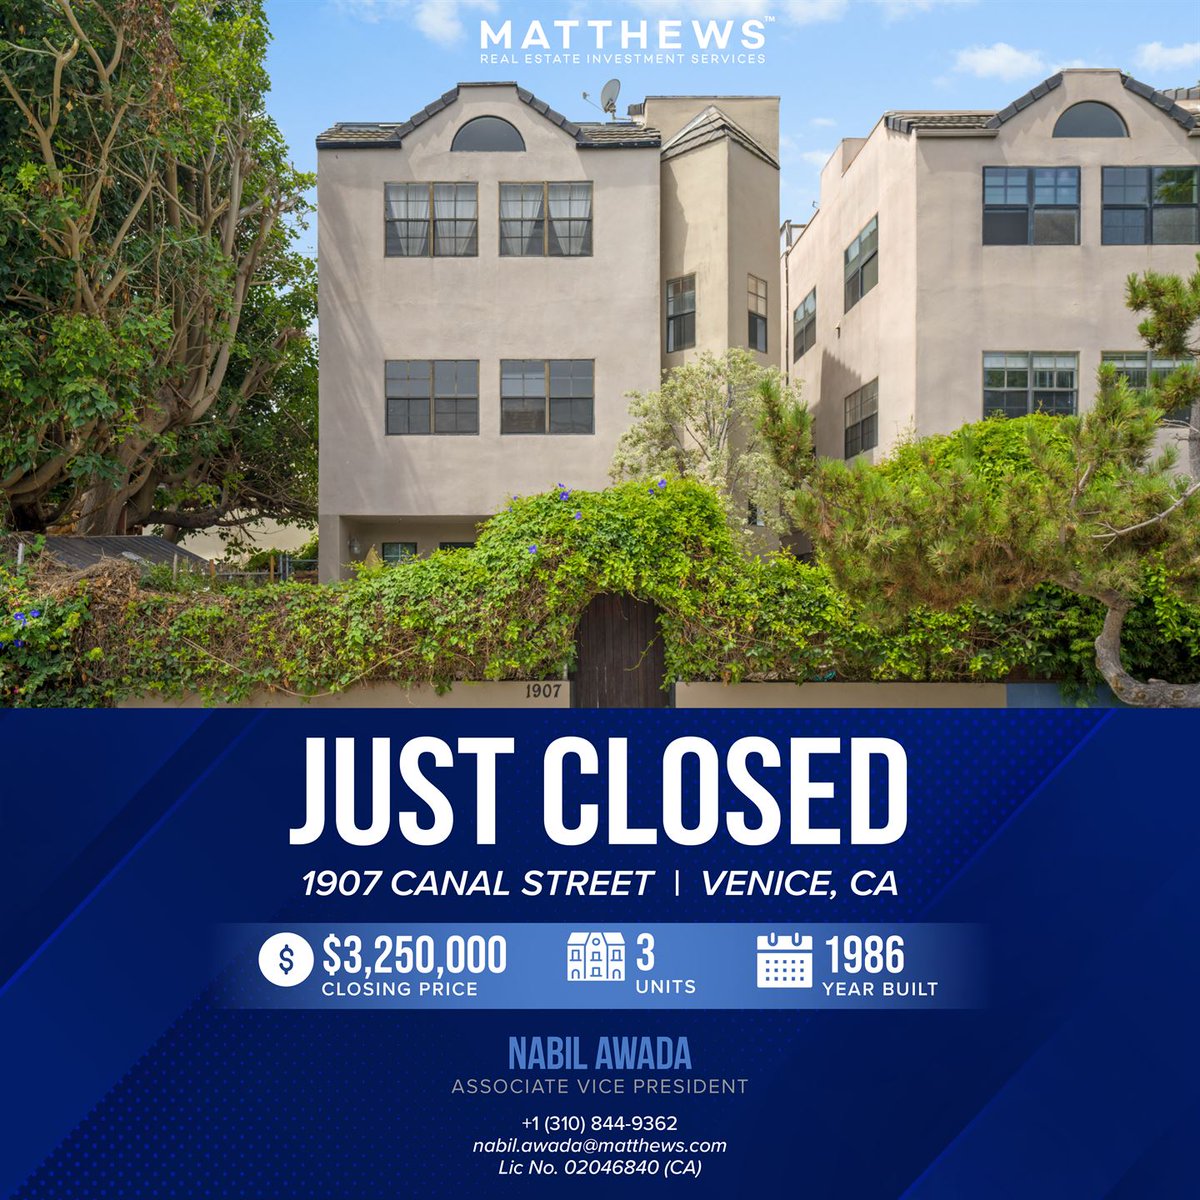 Just Closed | 3 Units in Venice, CA

🤝 It was great working with everyone involved on this deal. Please reach out to me for opportunities I have coming this year!

#Matthews #CRE #RealEstate #California #Multifamily #Closed #CARealEstate